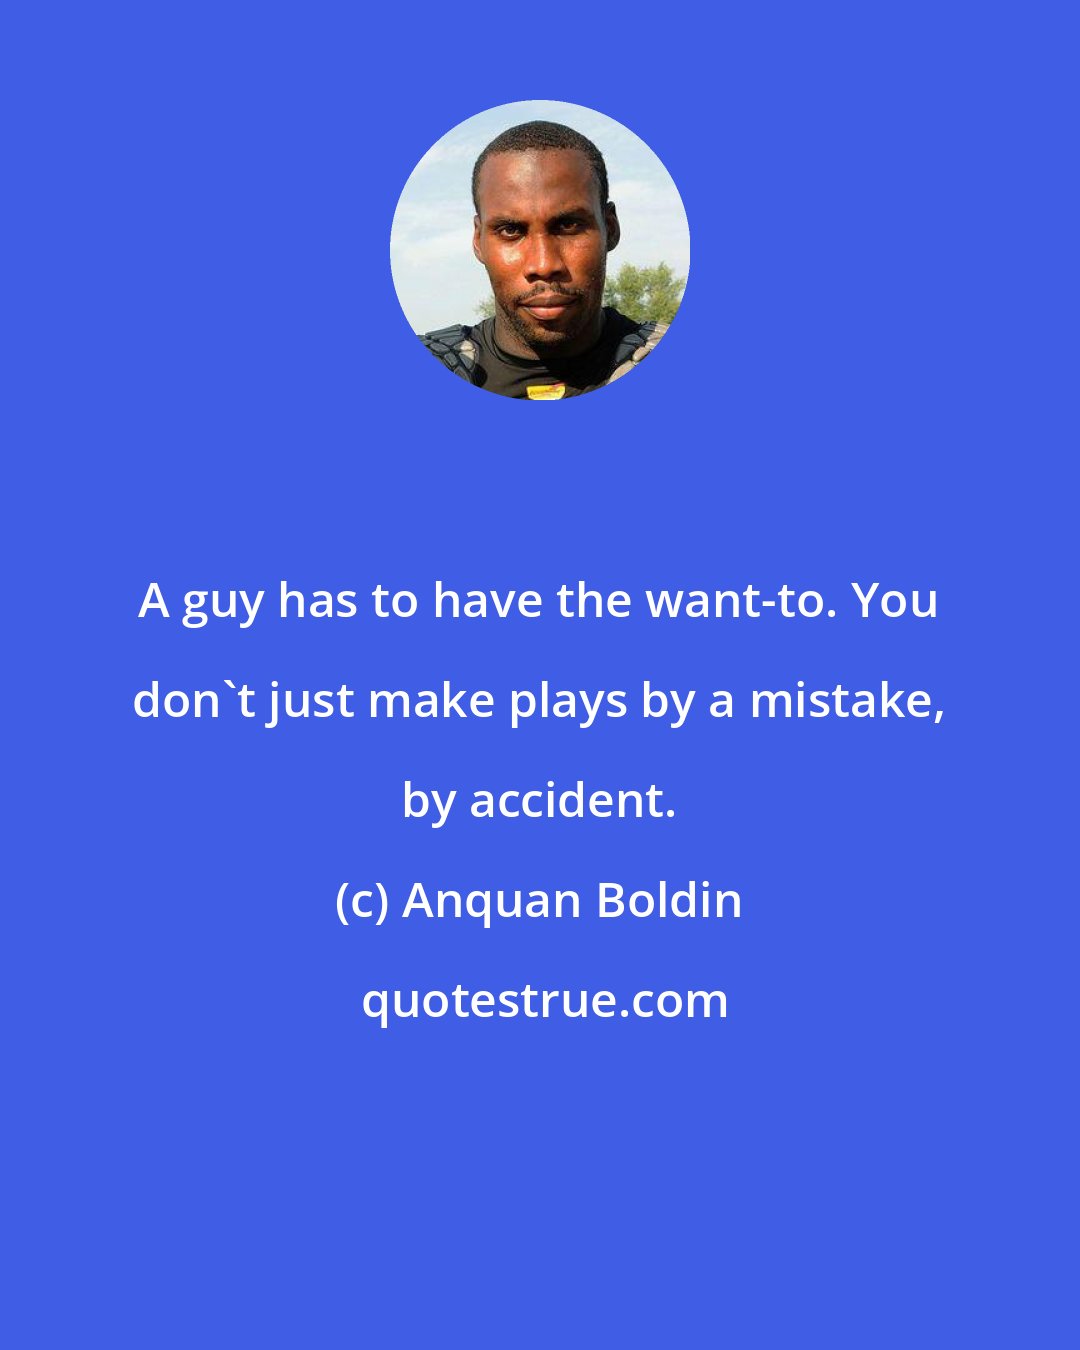 Anquan Boldin: A guy has to have the want-to. You don't just make plays by a mistake, by accident.